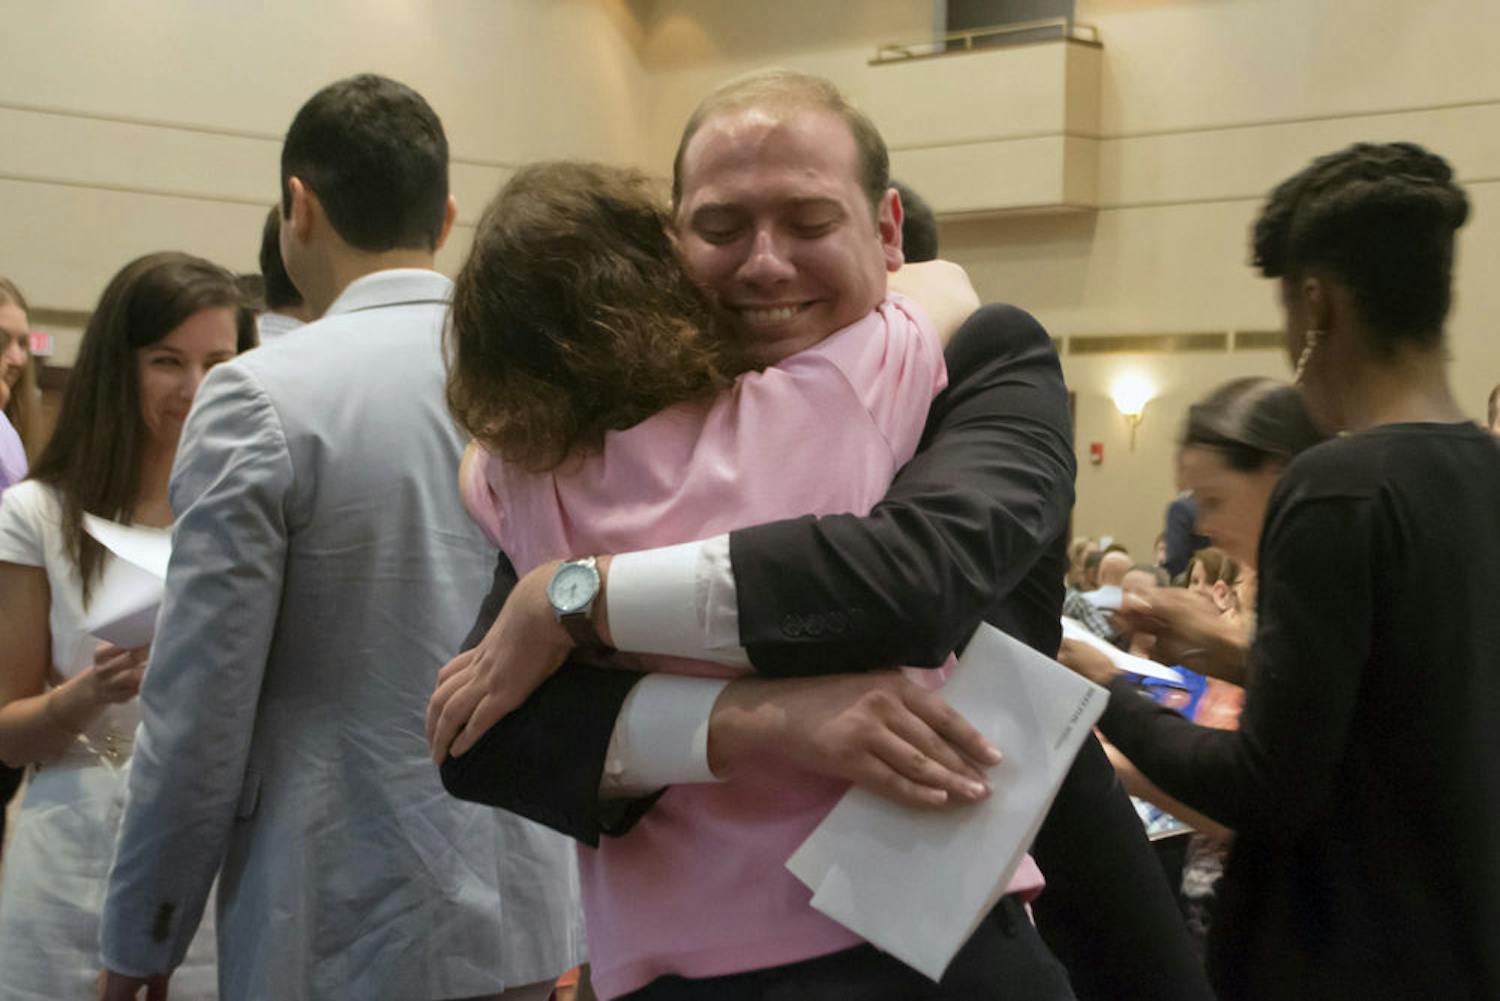 Paul Skelton, a fourth-year UF medical student, embraces his mother, Dr. Nadine Skelton, after finding out the National Resident Matching Program results at UF College of Medicine's annual Match Day. Skelton was matched at the University of Florida for internal medicine. UF was his first-choice residency program.